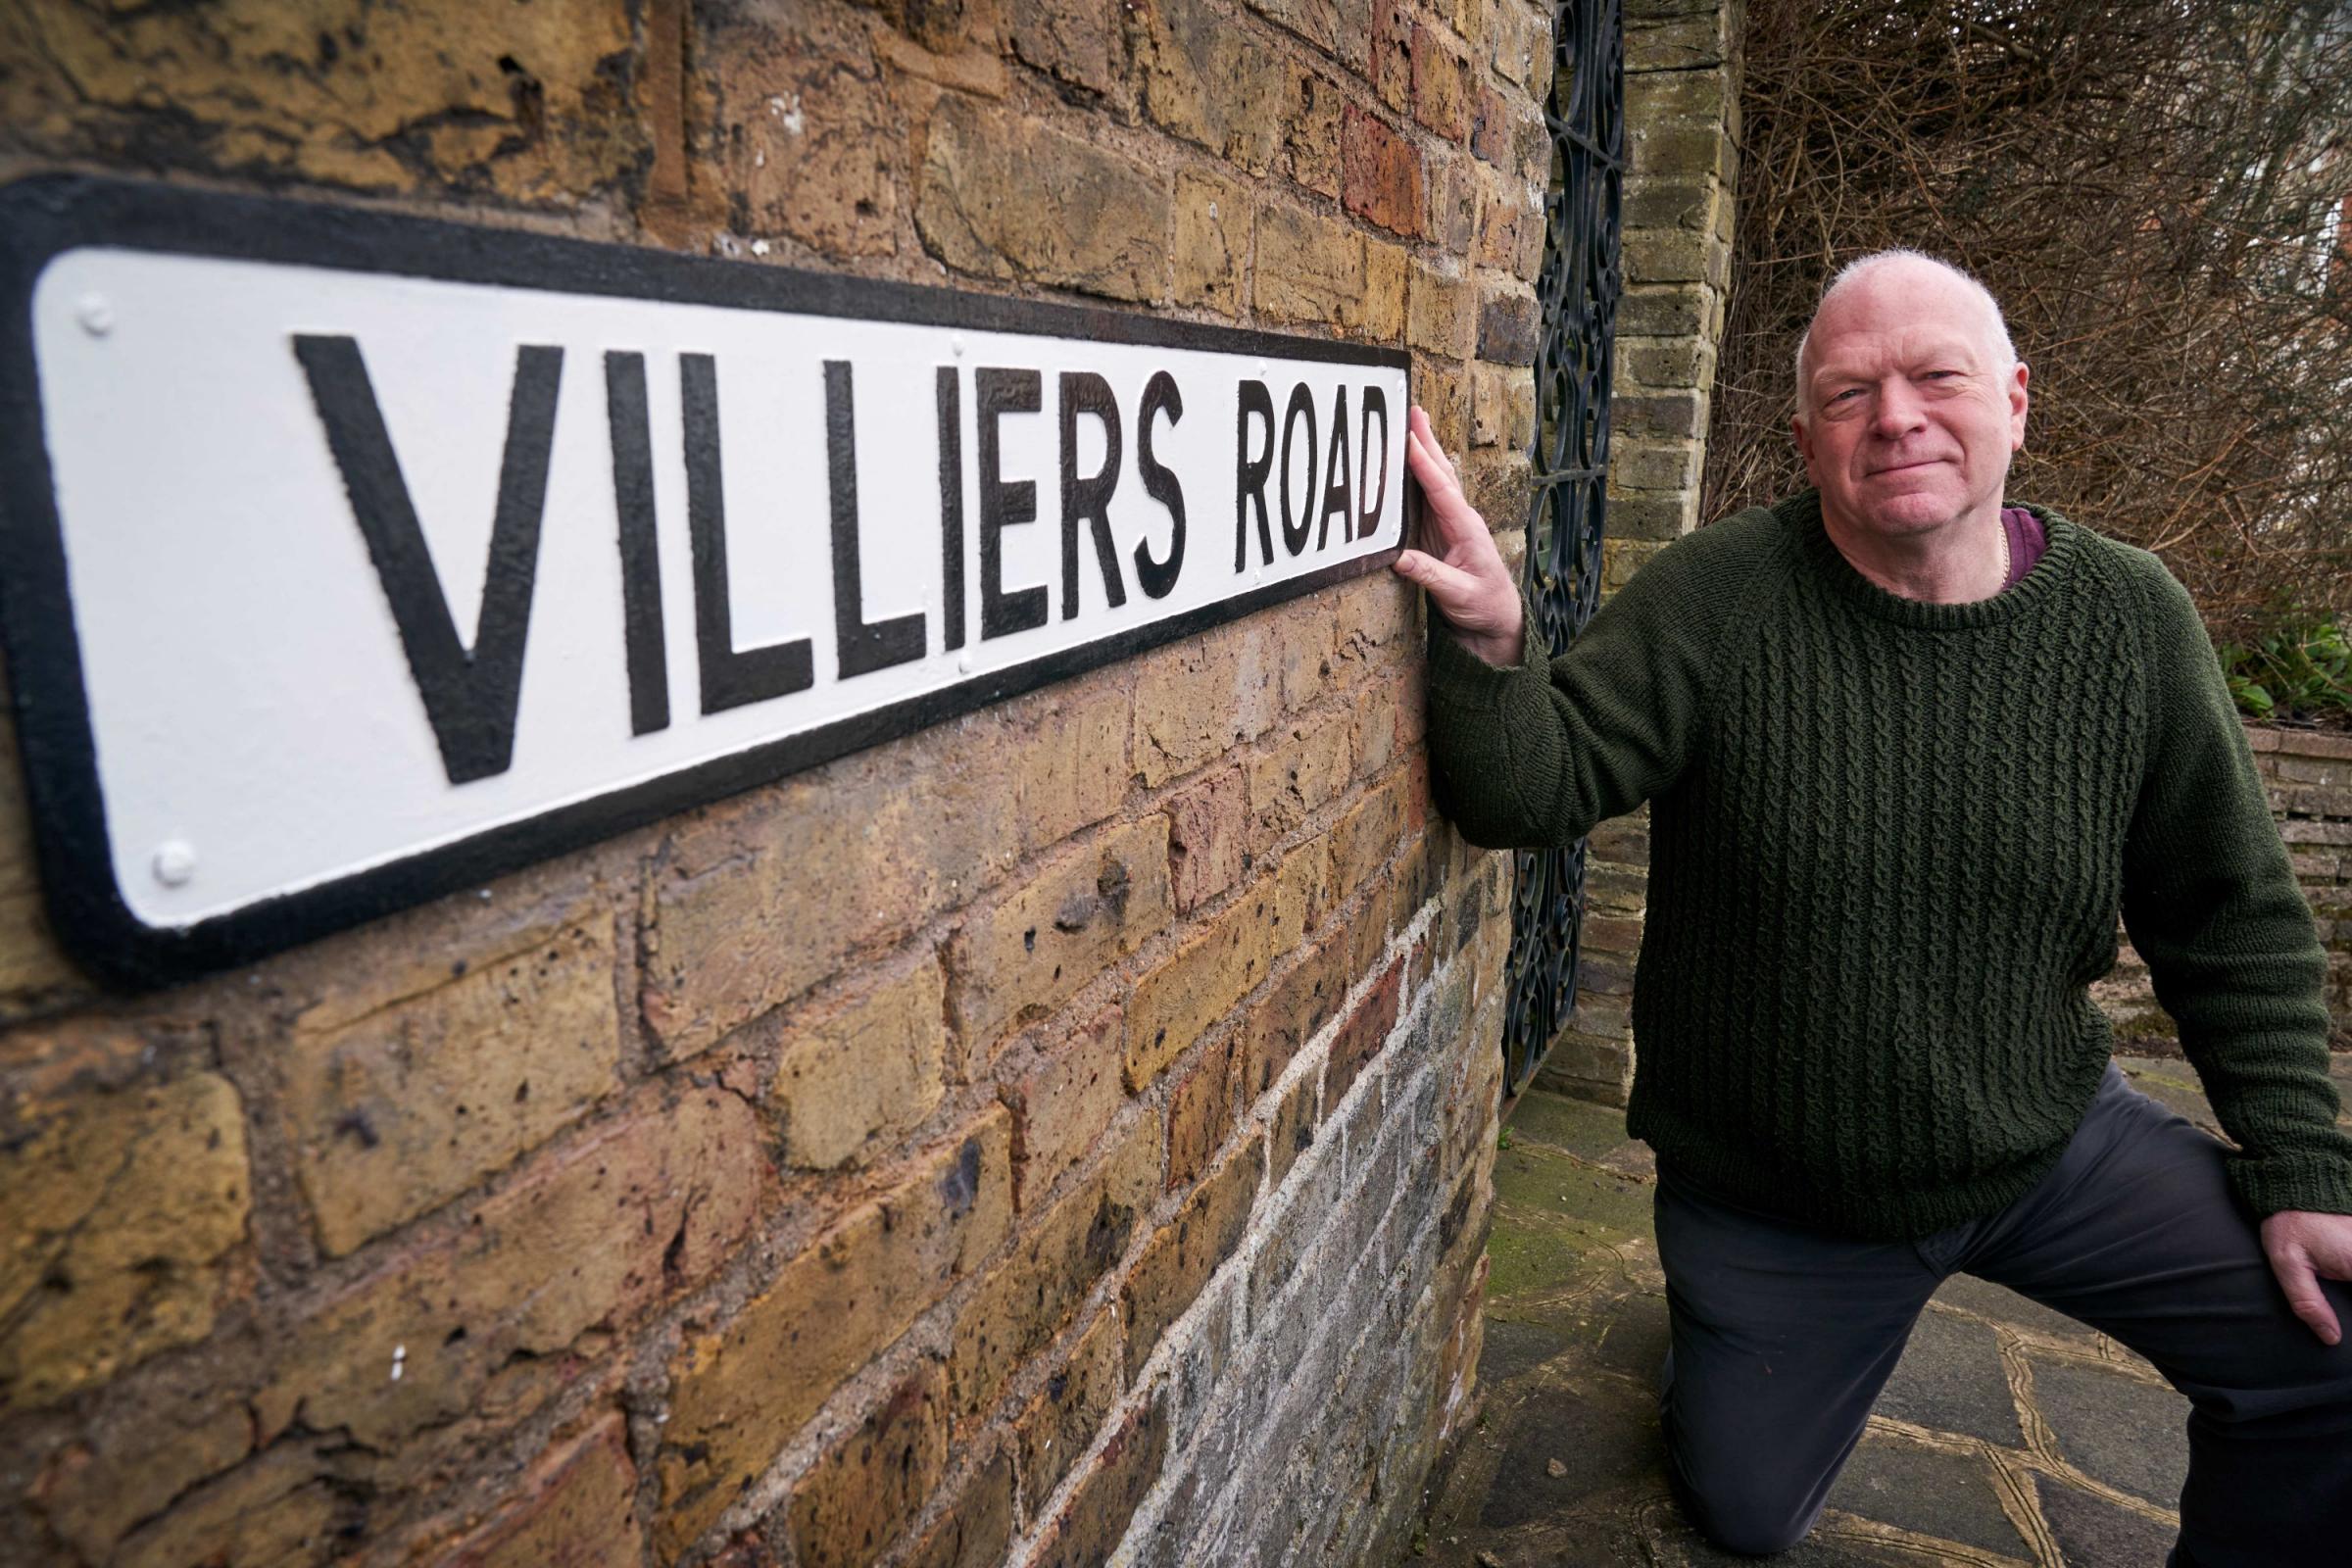 Councillor Stephen Giles-Medhurst standing by the restored Villiers Road street sign